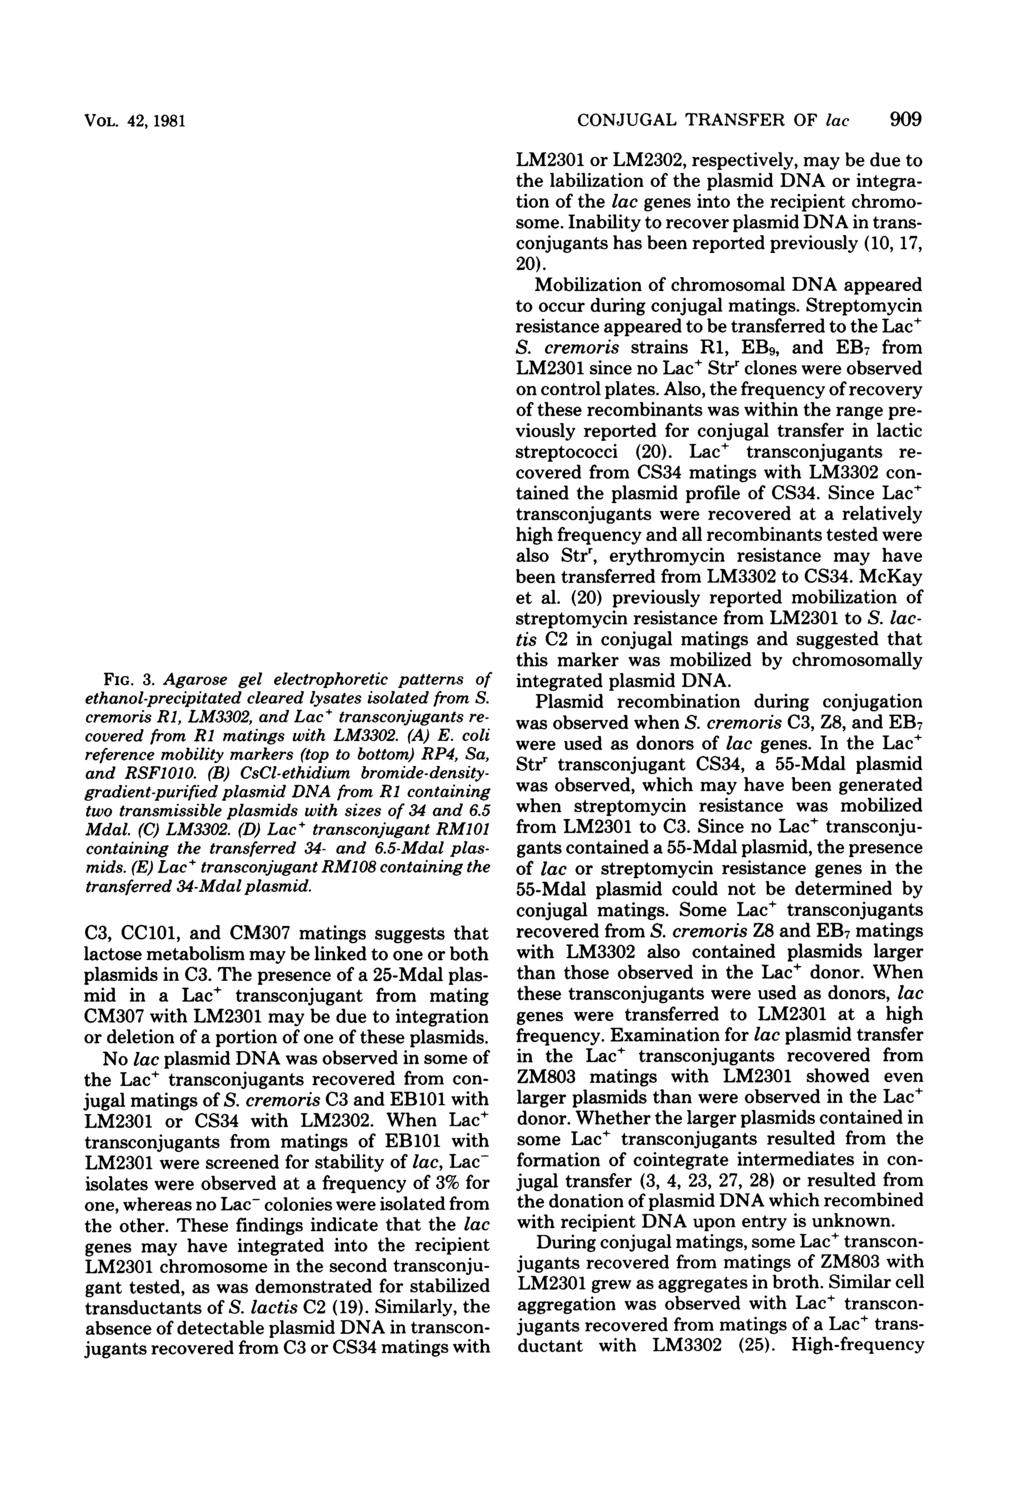 VOL. 42, 1981 34 23 ABC DE FIG. 3. Agarose gel electrophoretic patterns of ethanol-precipitated cleared lysates isolated from S.